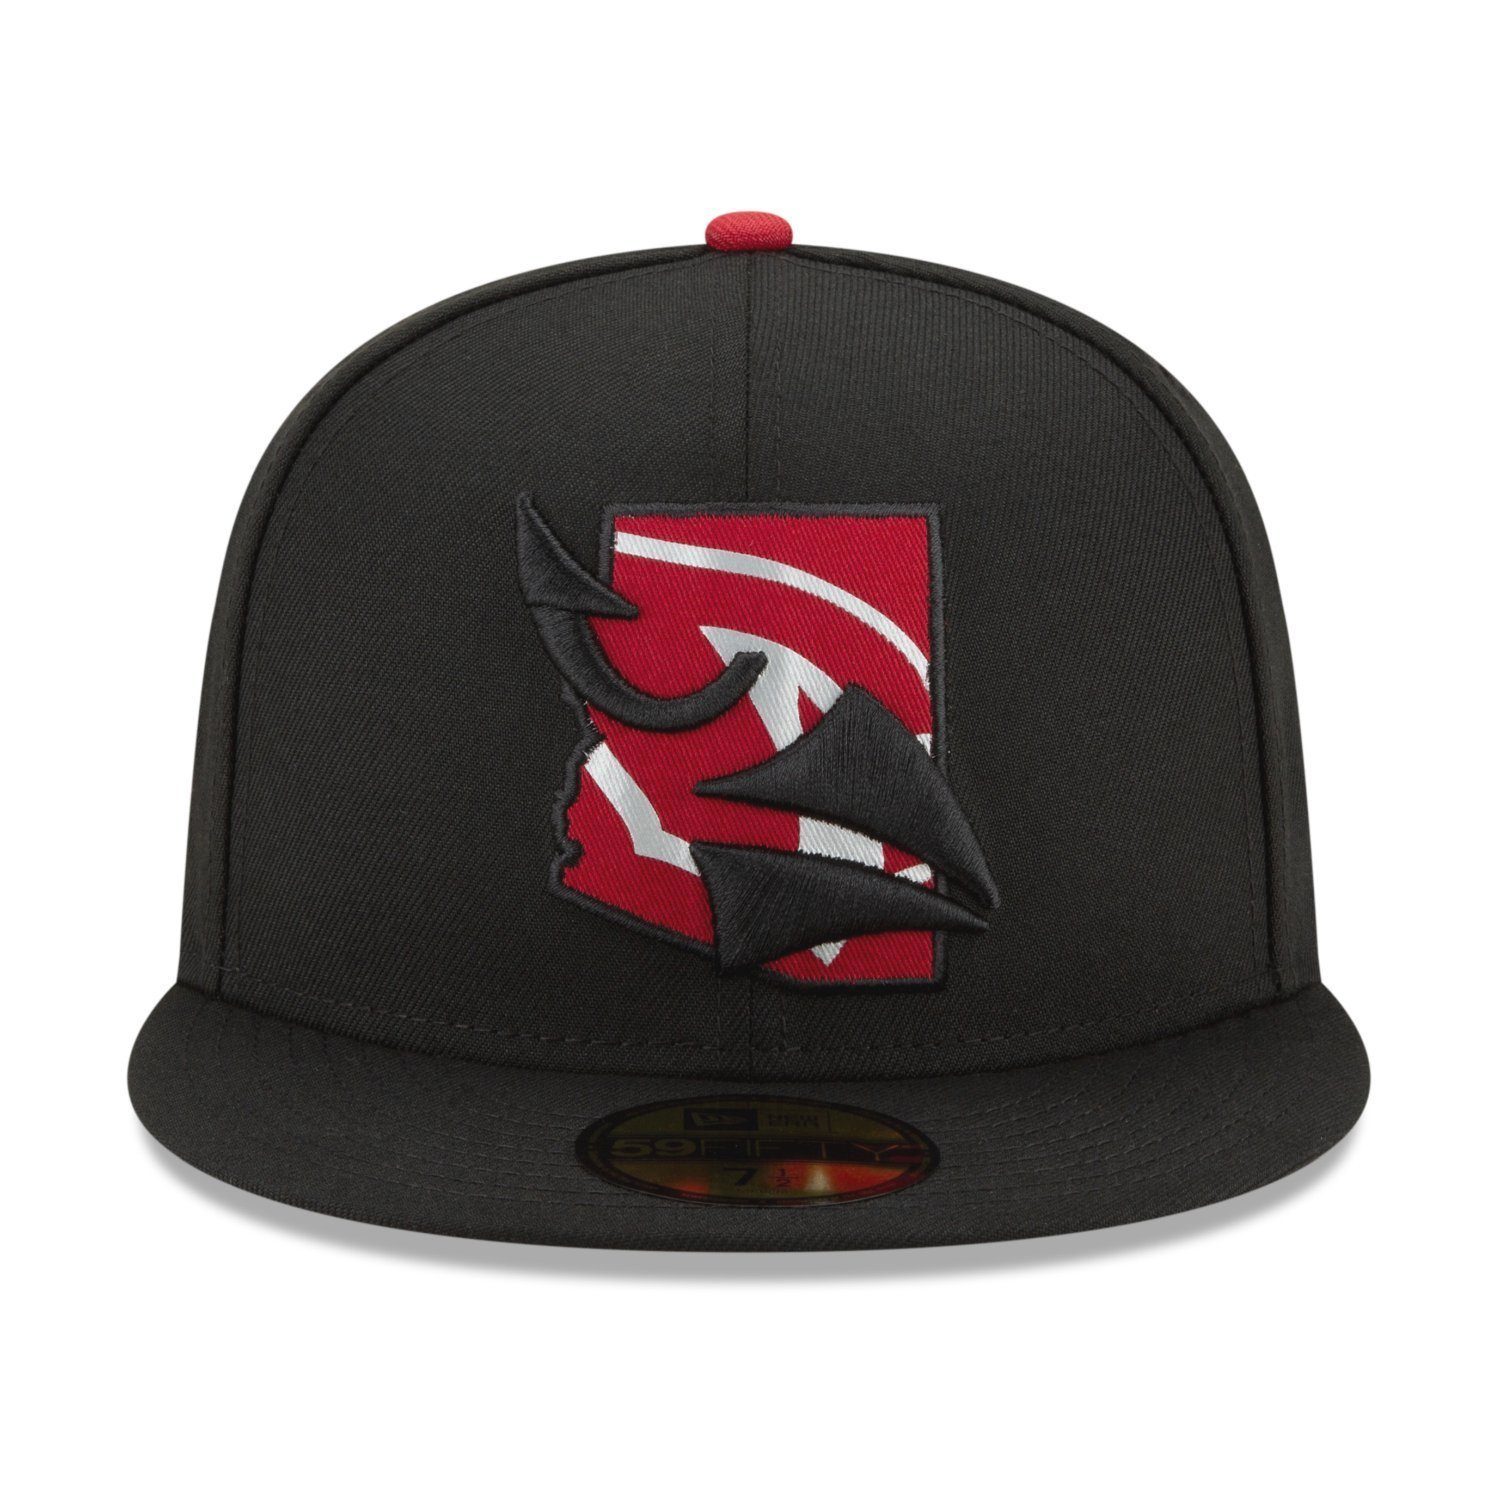 Era New LOGO Cap STATE Fitted Arizona NFL Cardinals Teams 59Fifty